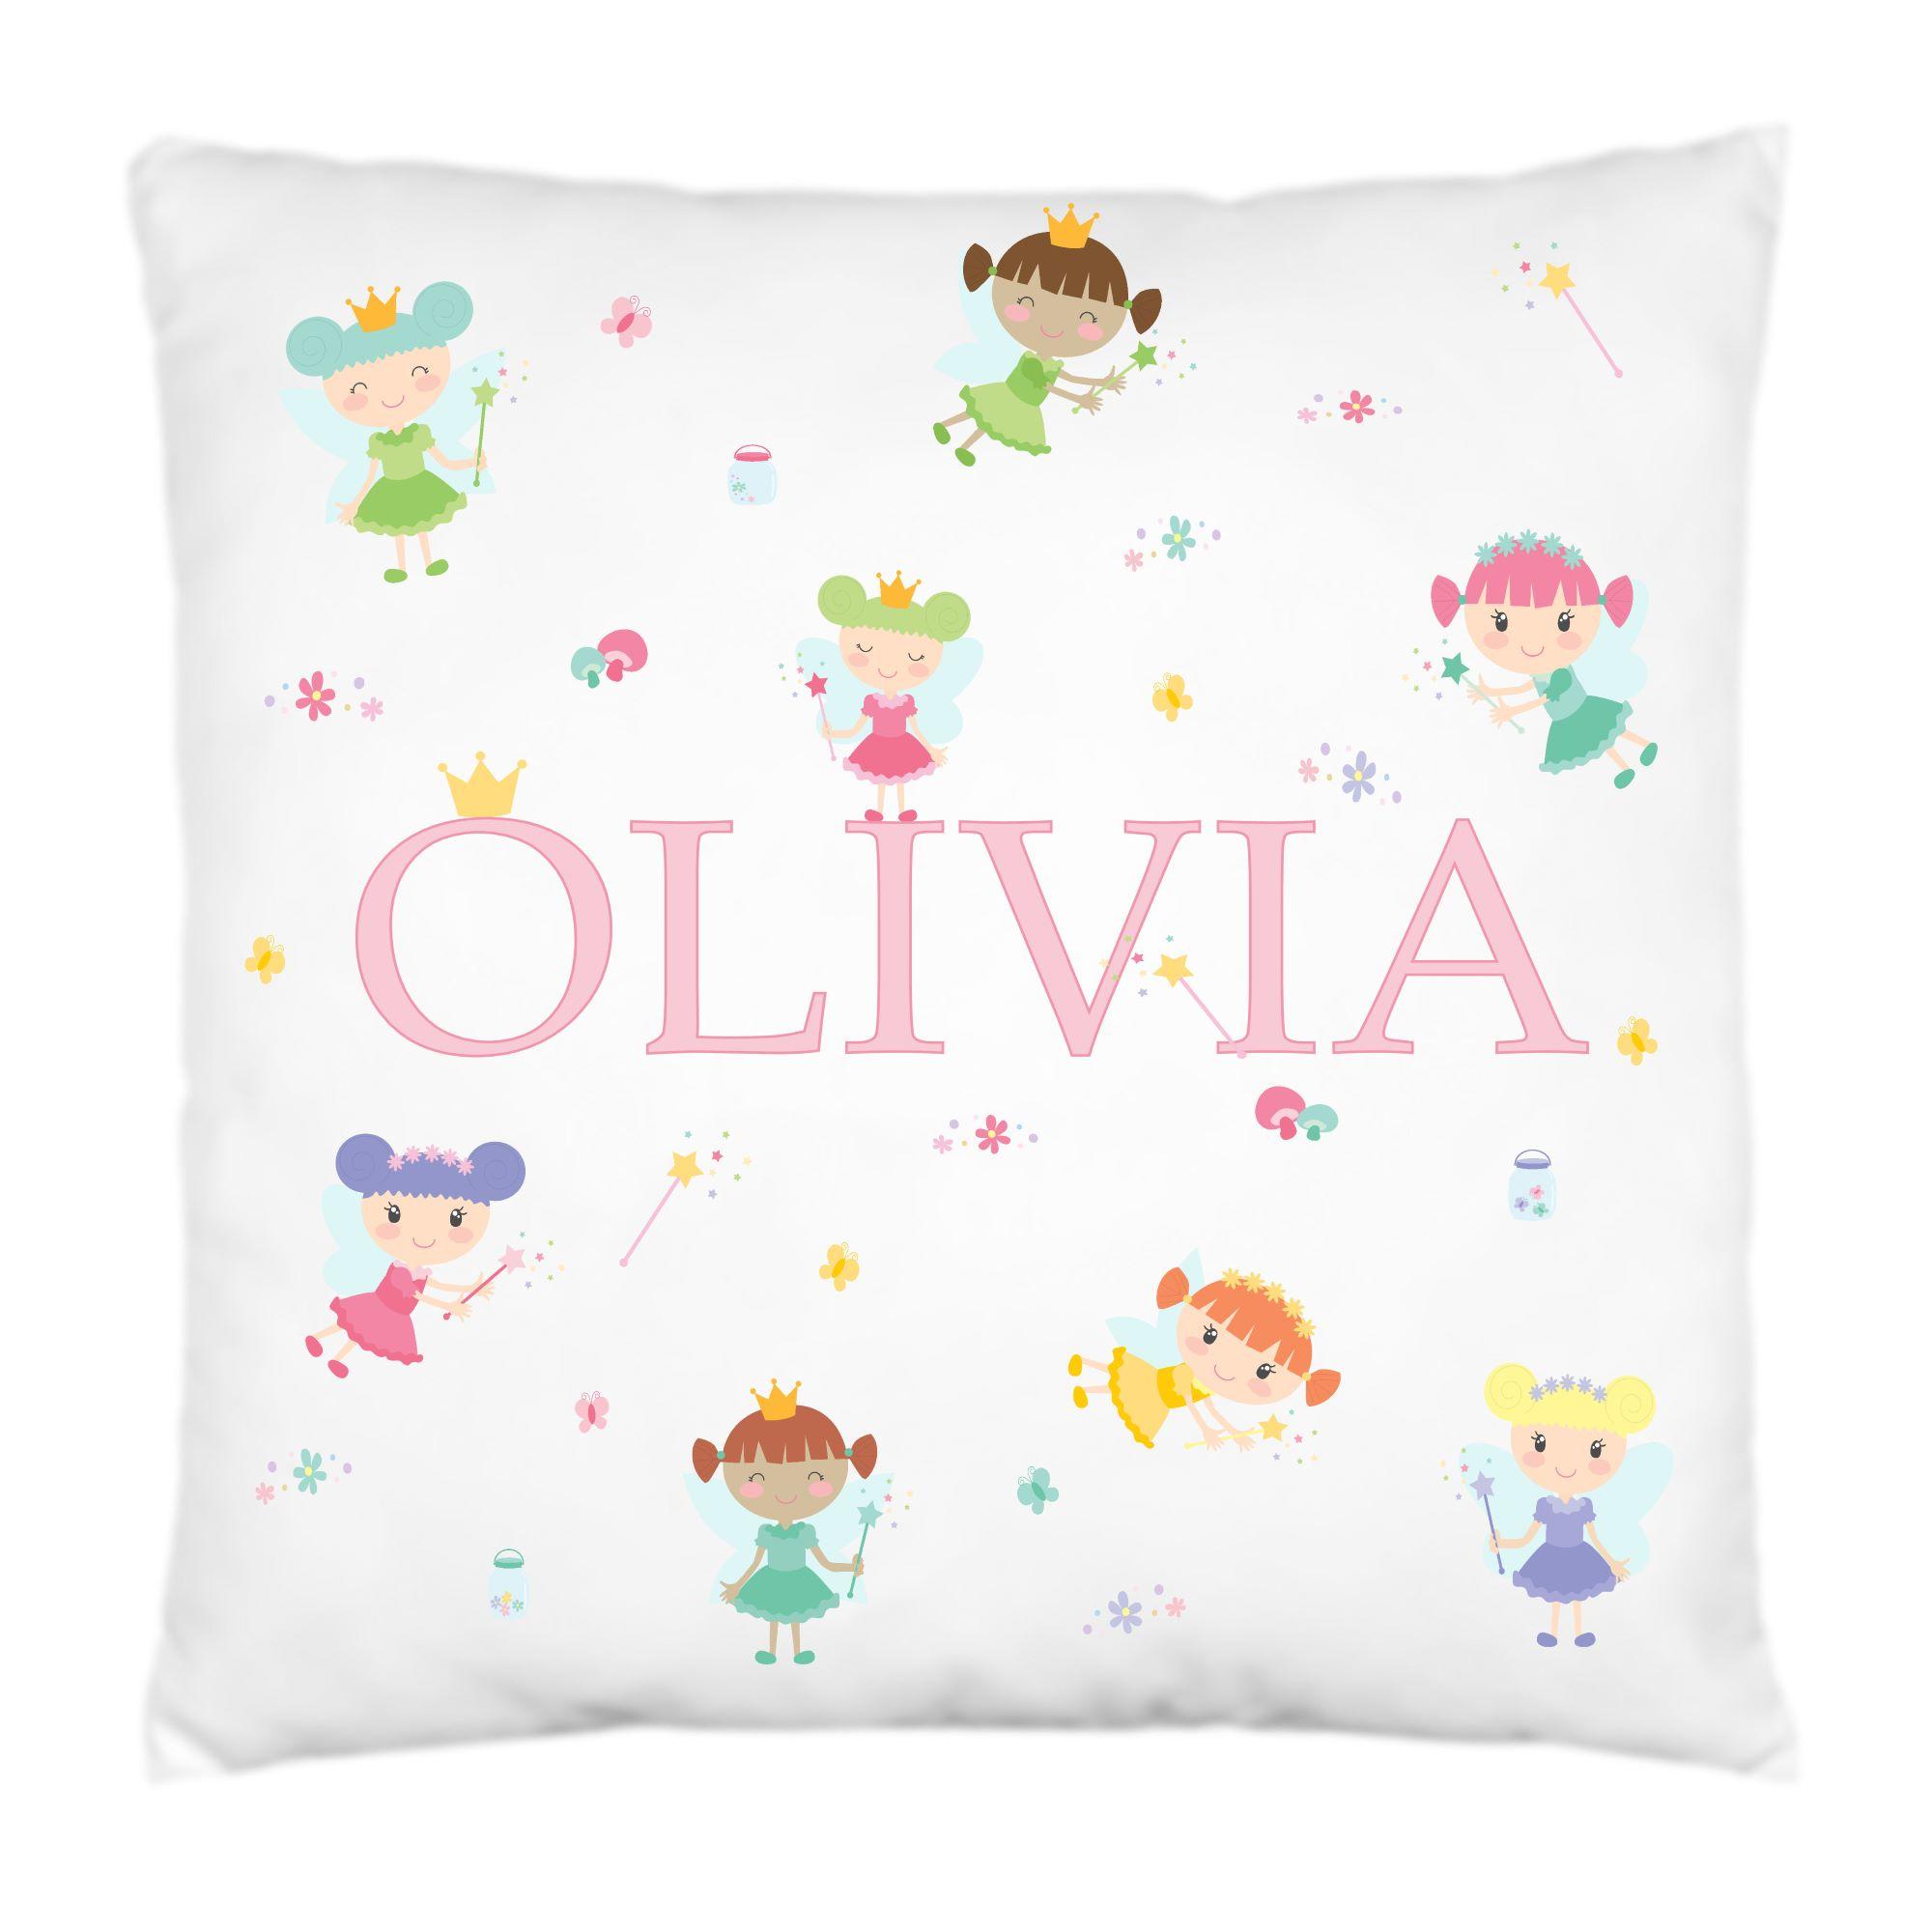 Forest Fairies Personalised Cushion,Pillow,Fairy Gift,Pink Bedroom,Girls Bedroom Accessory